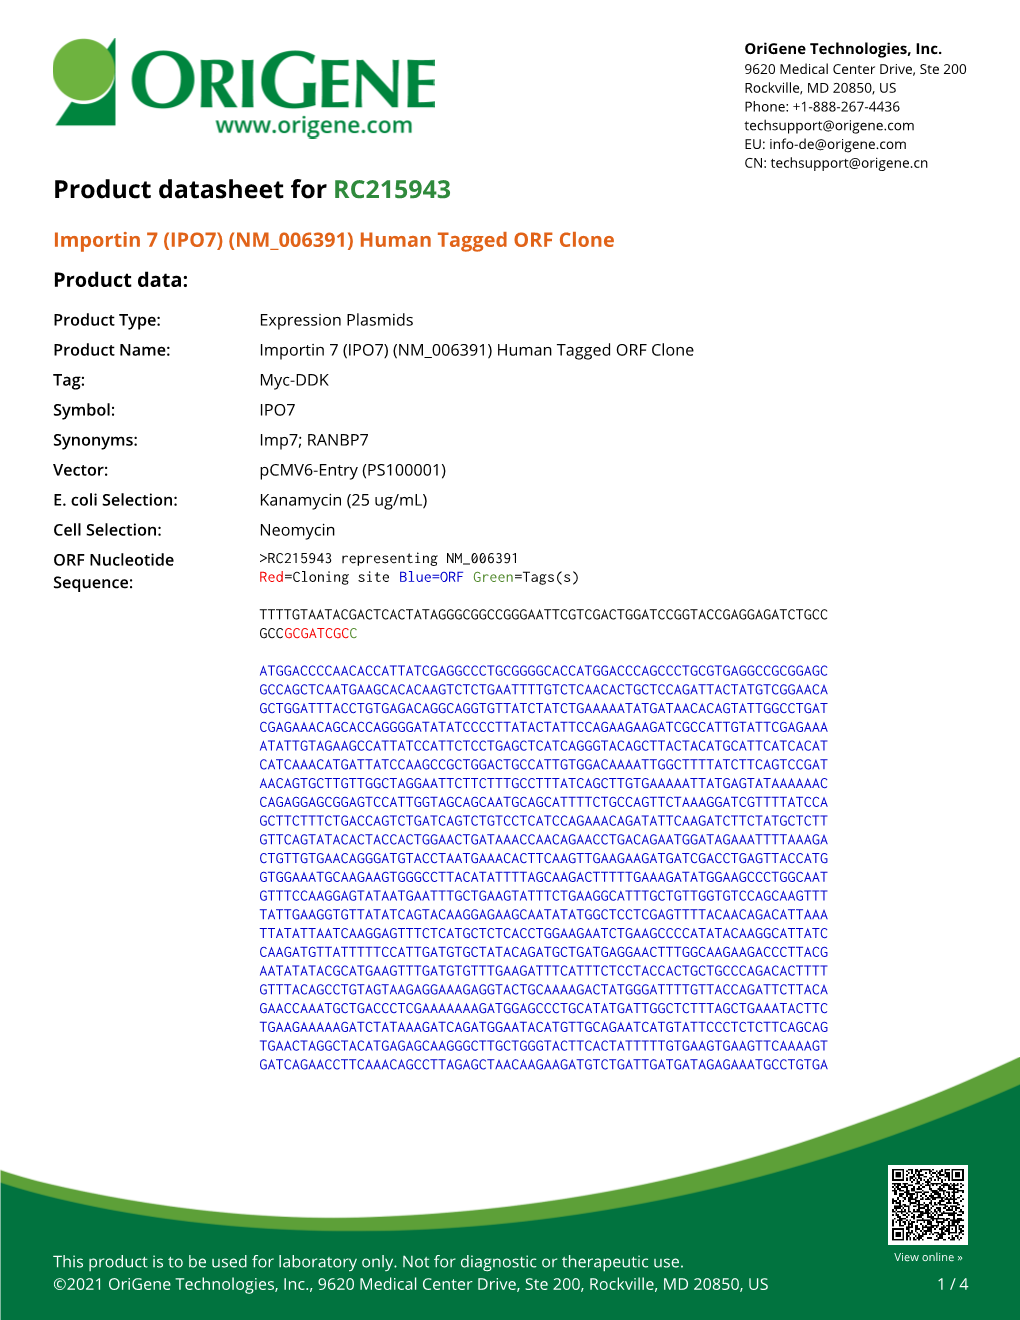 (IPO7) (NM 006391) Human Tagged ORF Clone Product Data